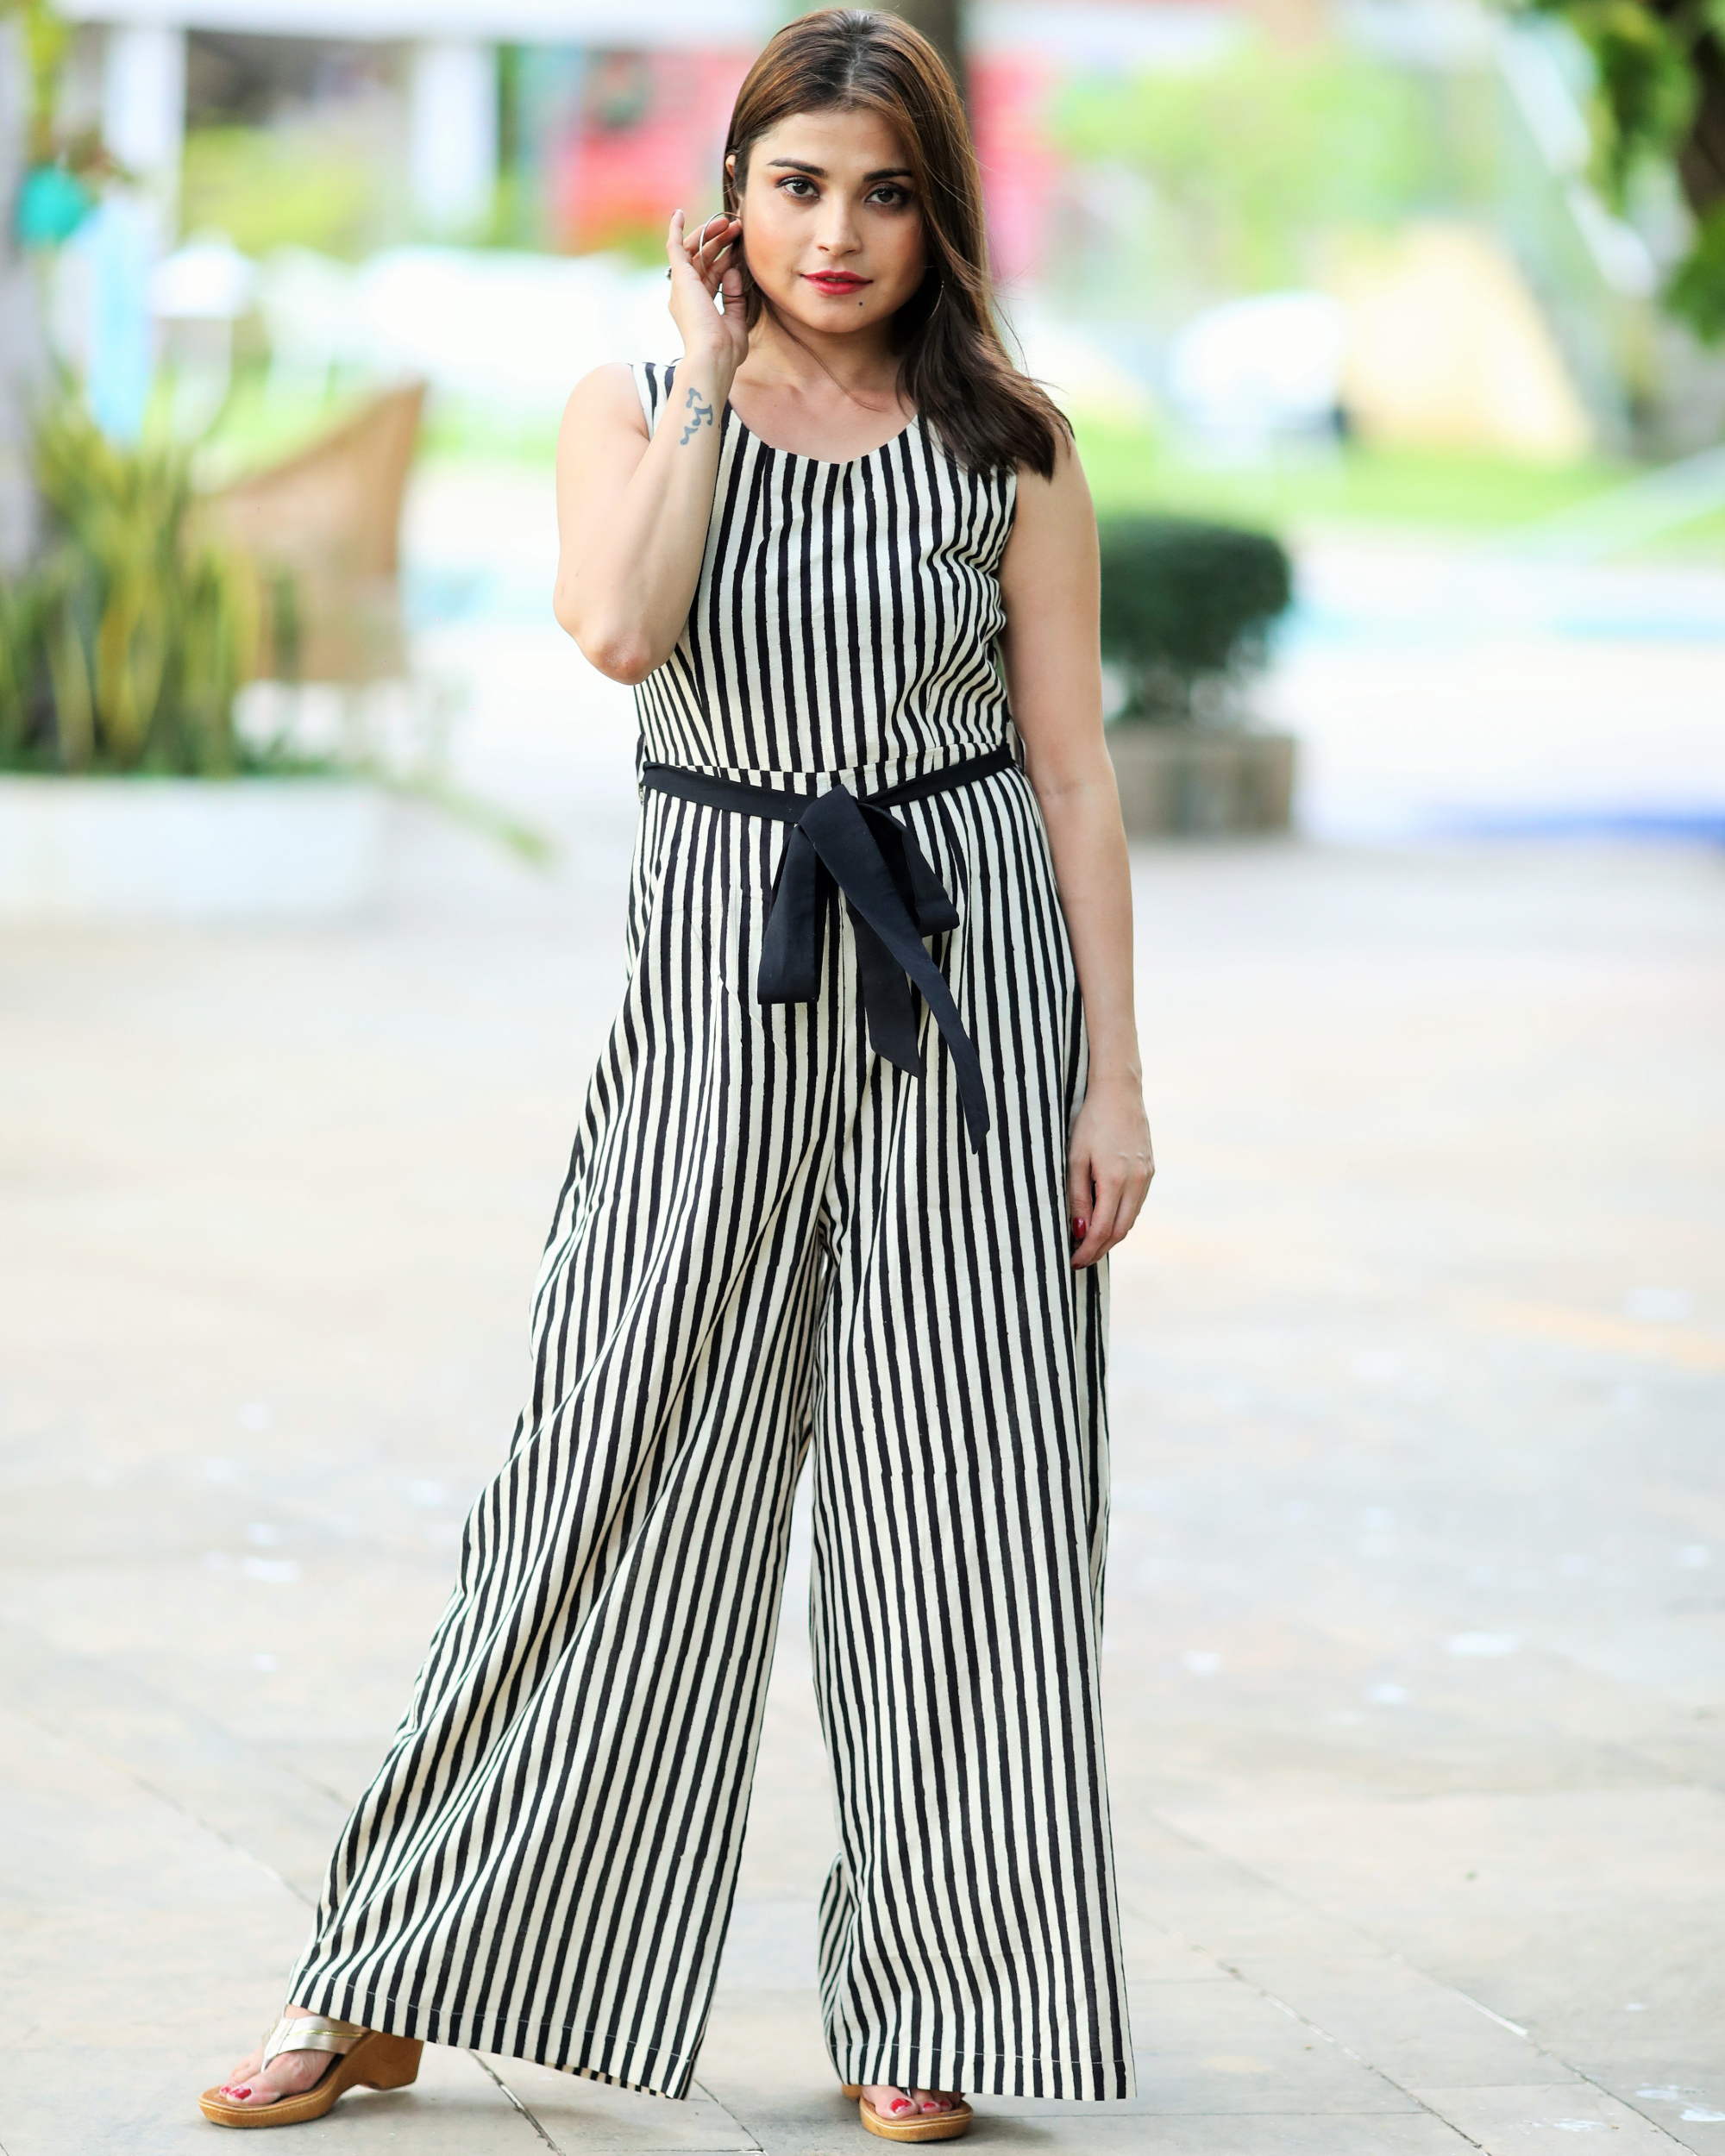 Black and white striped jumpsuit